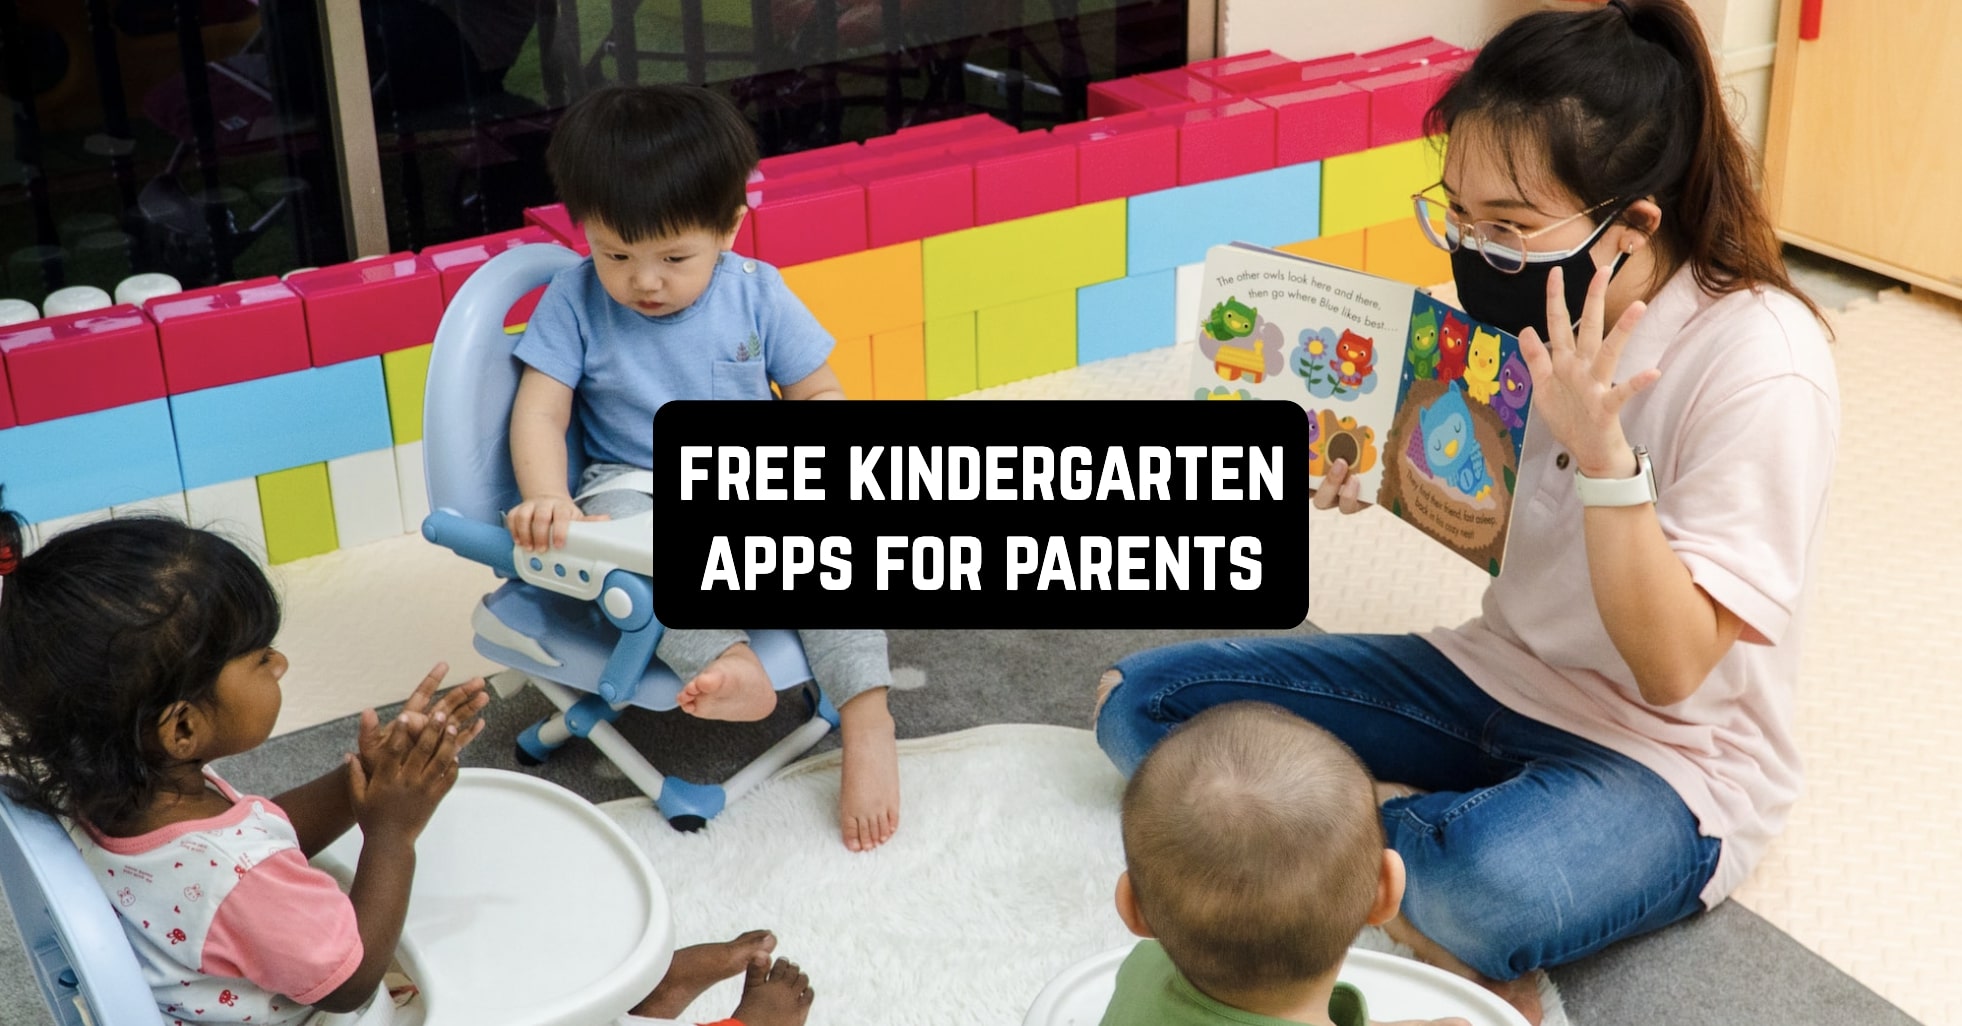 7-free-kindergarten-apps-for-parents-android-ios-freeappsforme